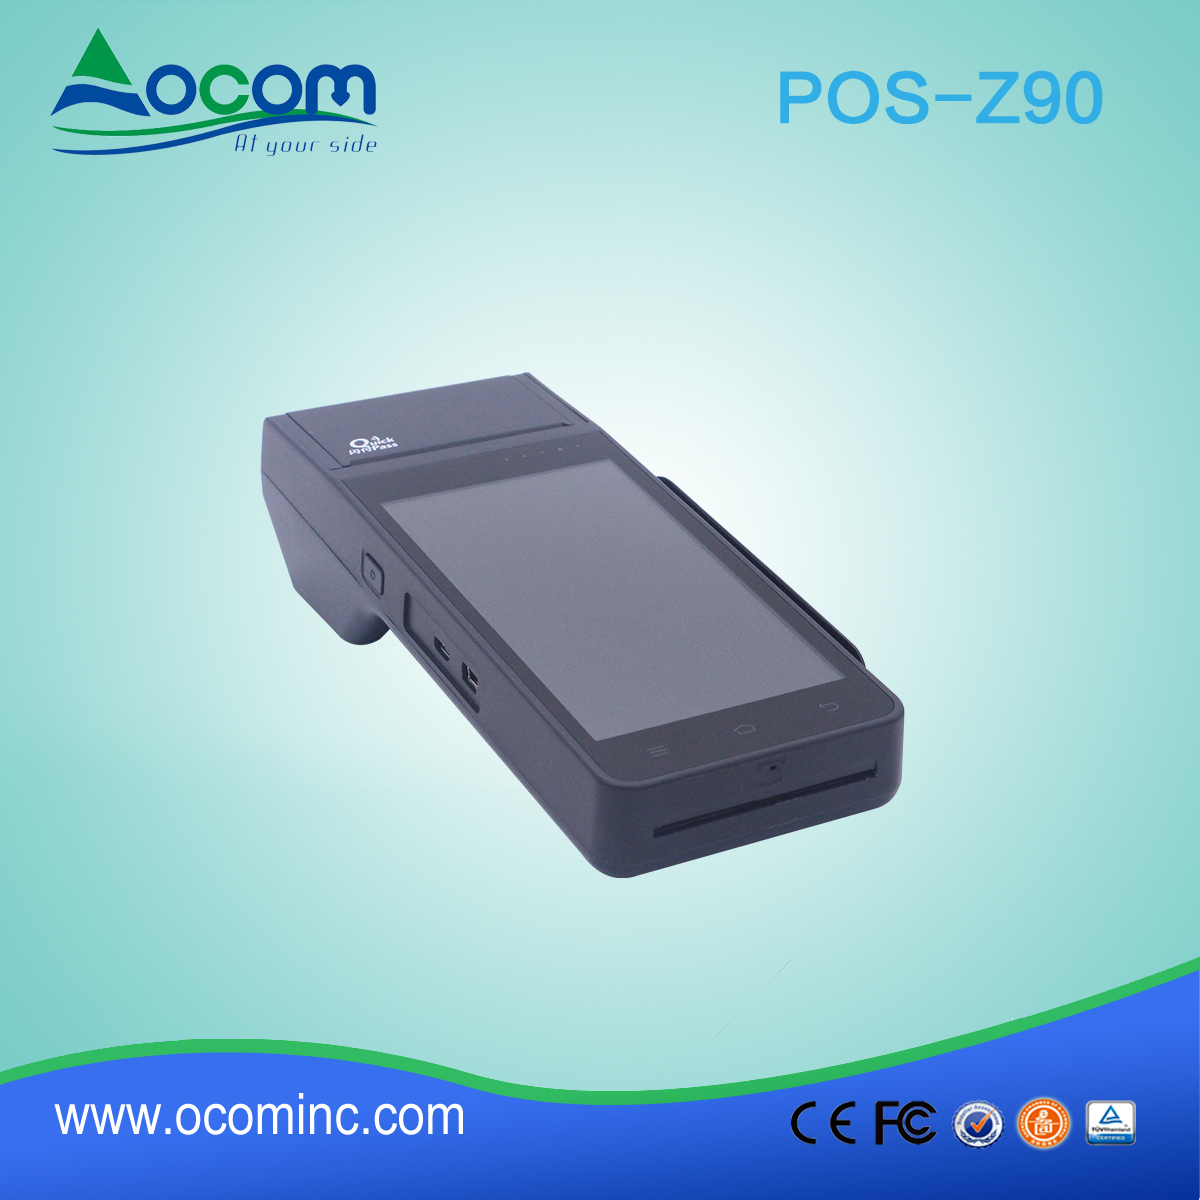 (POS-Z90) Low cost Android Handheld POS Terminal with thermal printer